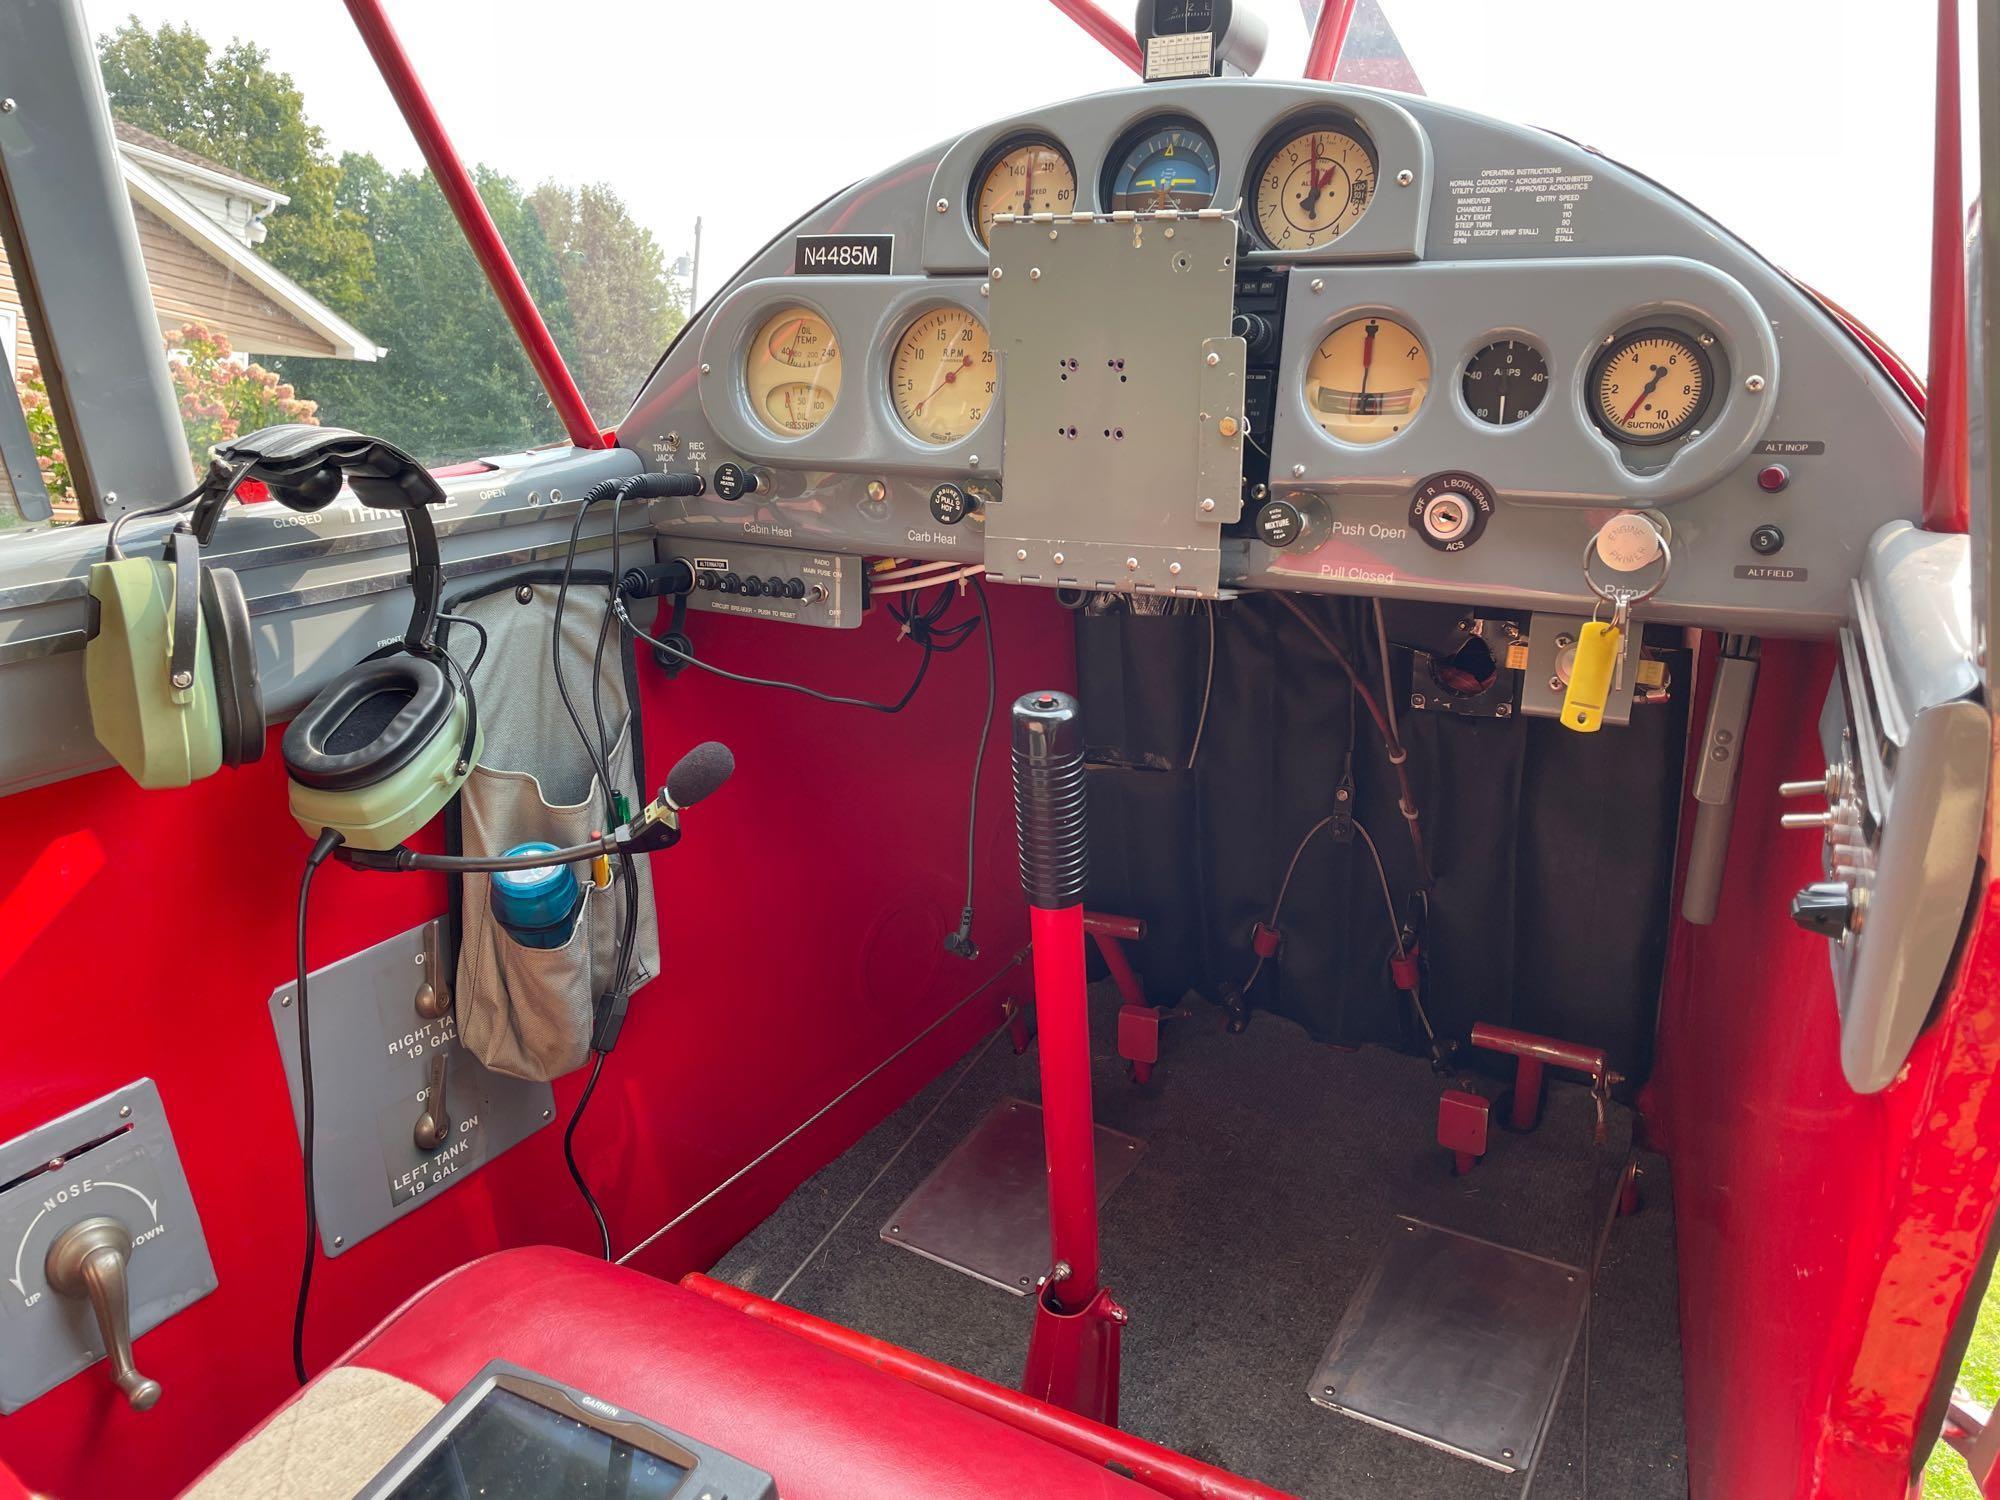 1947 piper PA12, 3 place, 0235 eng, 500 hrs total time